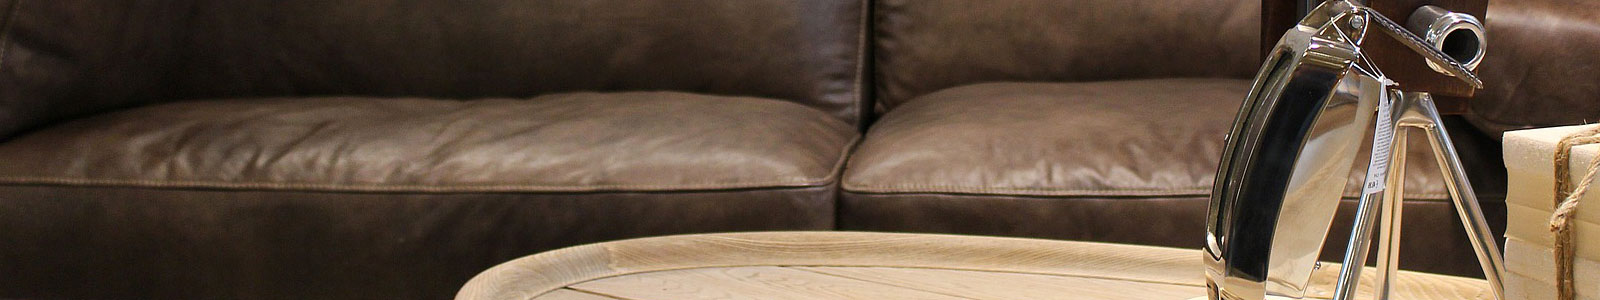 From Ancient Shoes to Home Theater Comfort: Leather Through The Ages